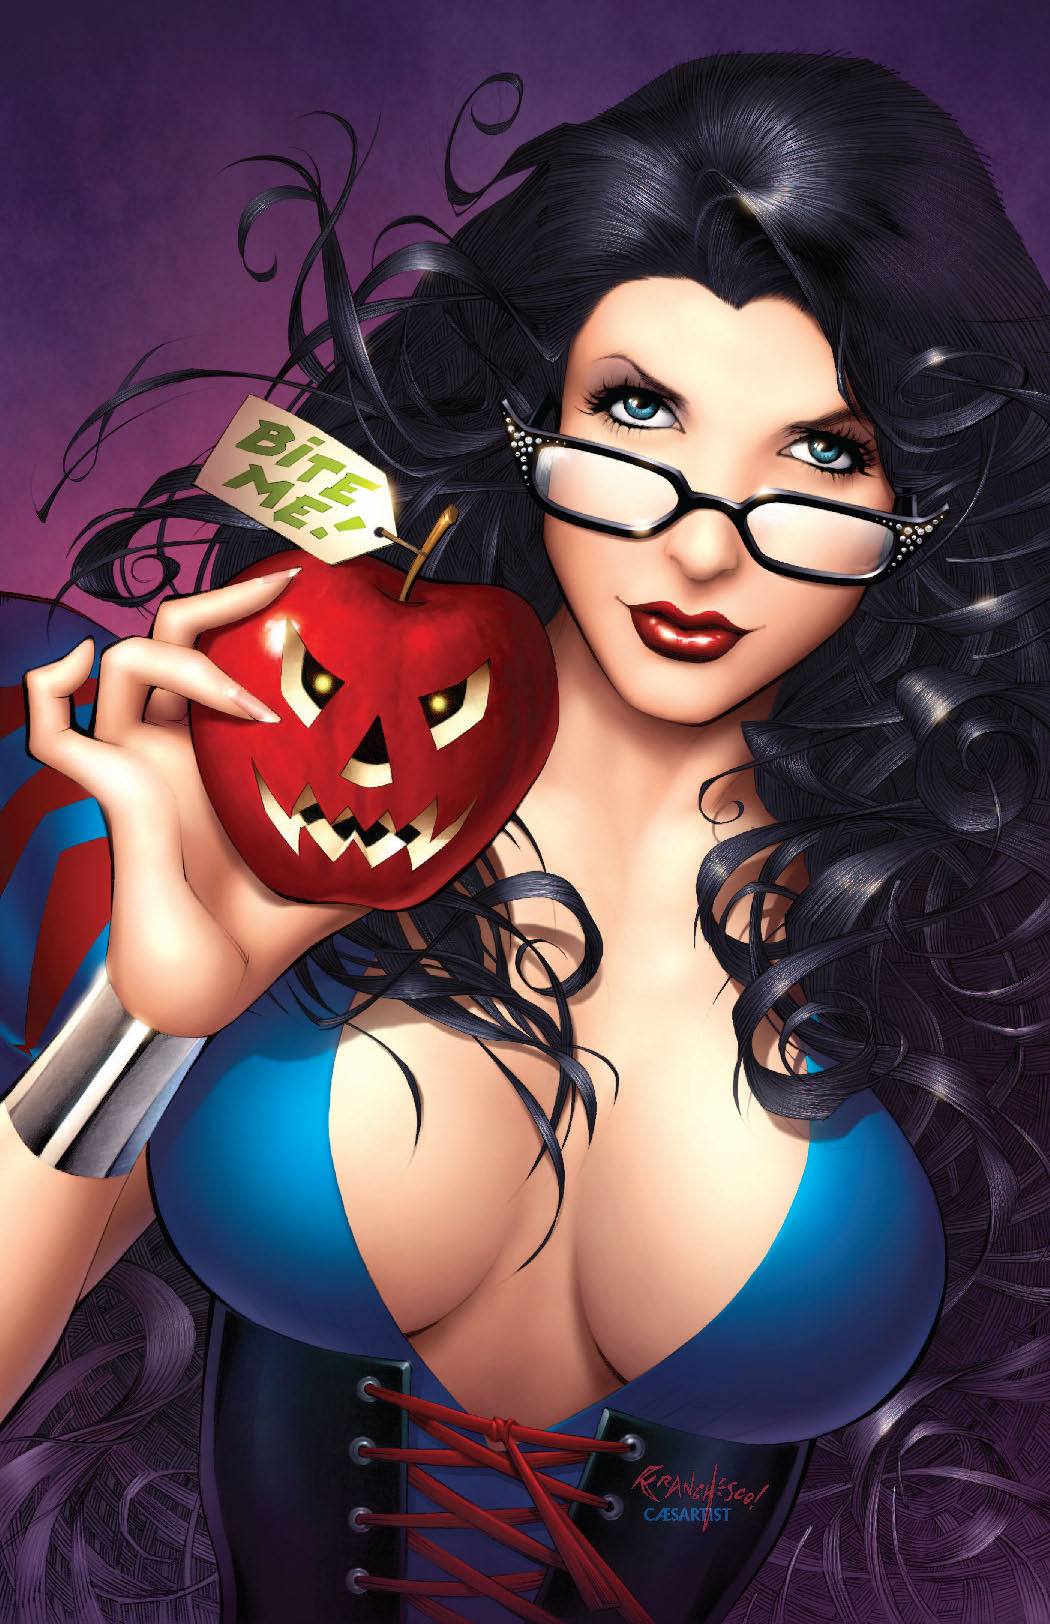 Grimm Fairy Tales: Halloween Backgrounds on Wallpapers Vista